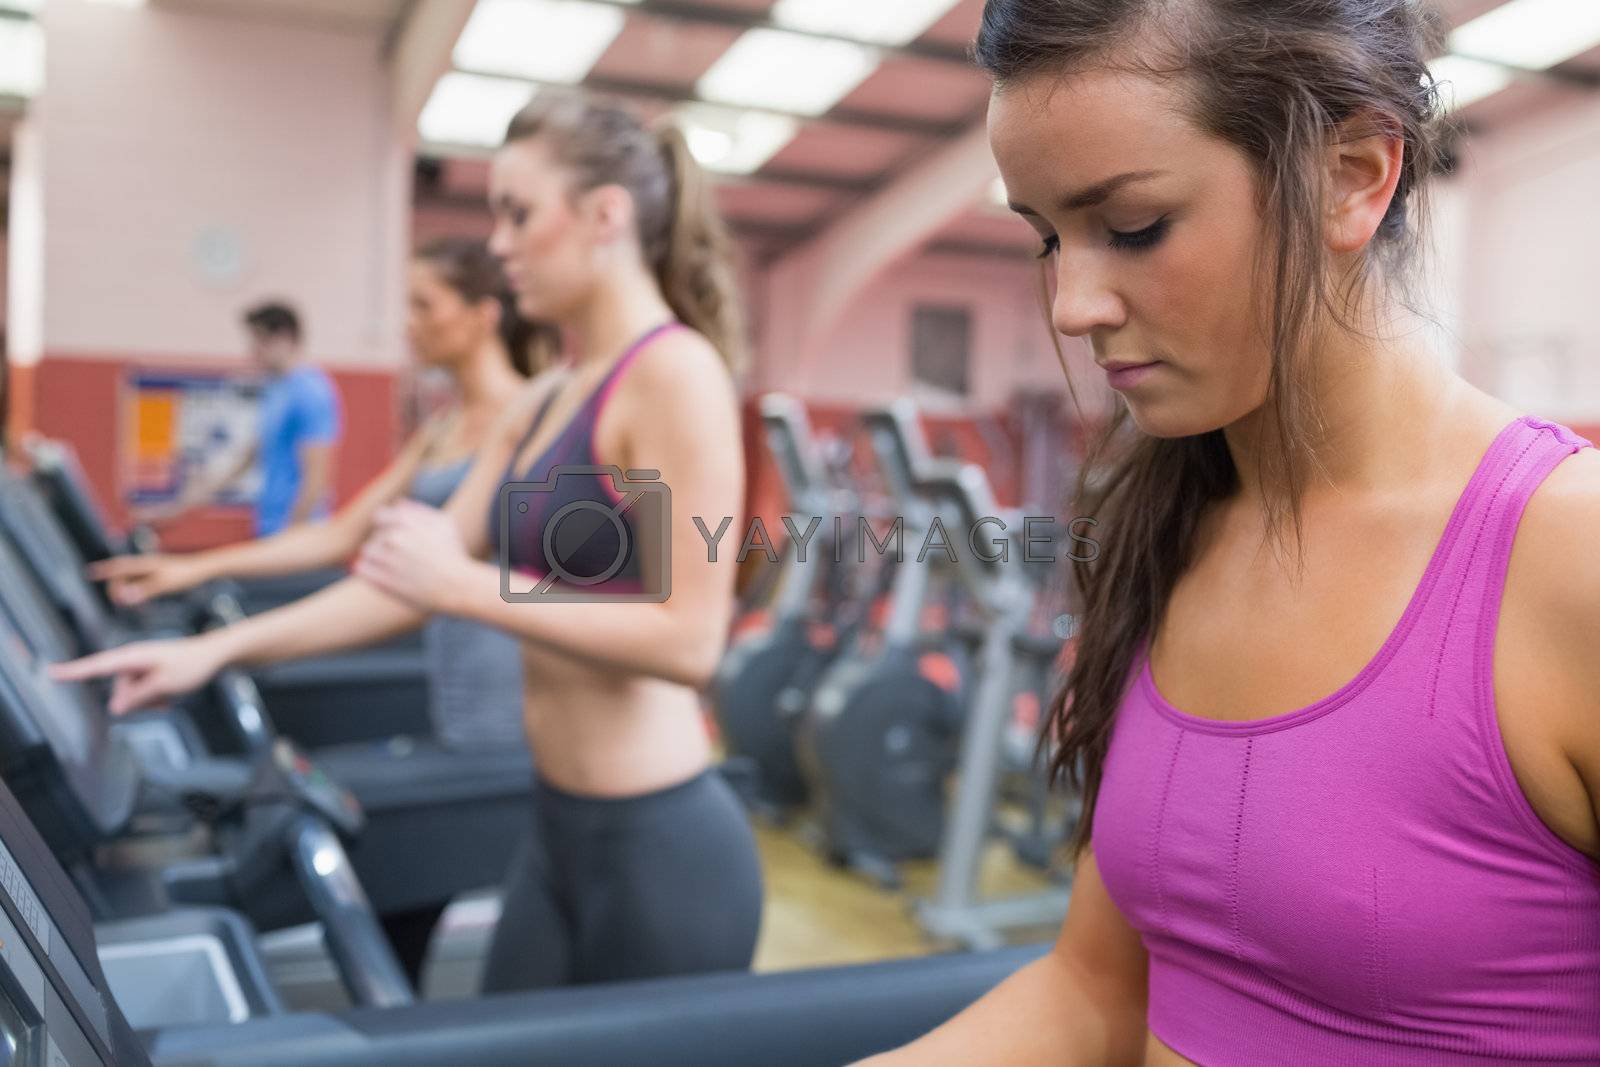 Royalty free image of People in the gym by Wavebreakmedia